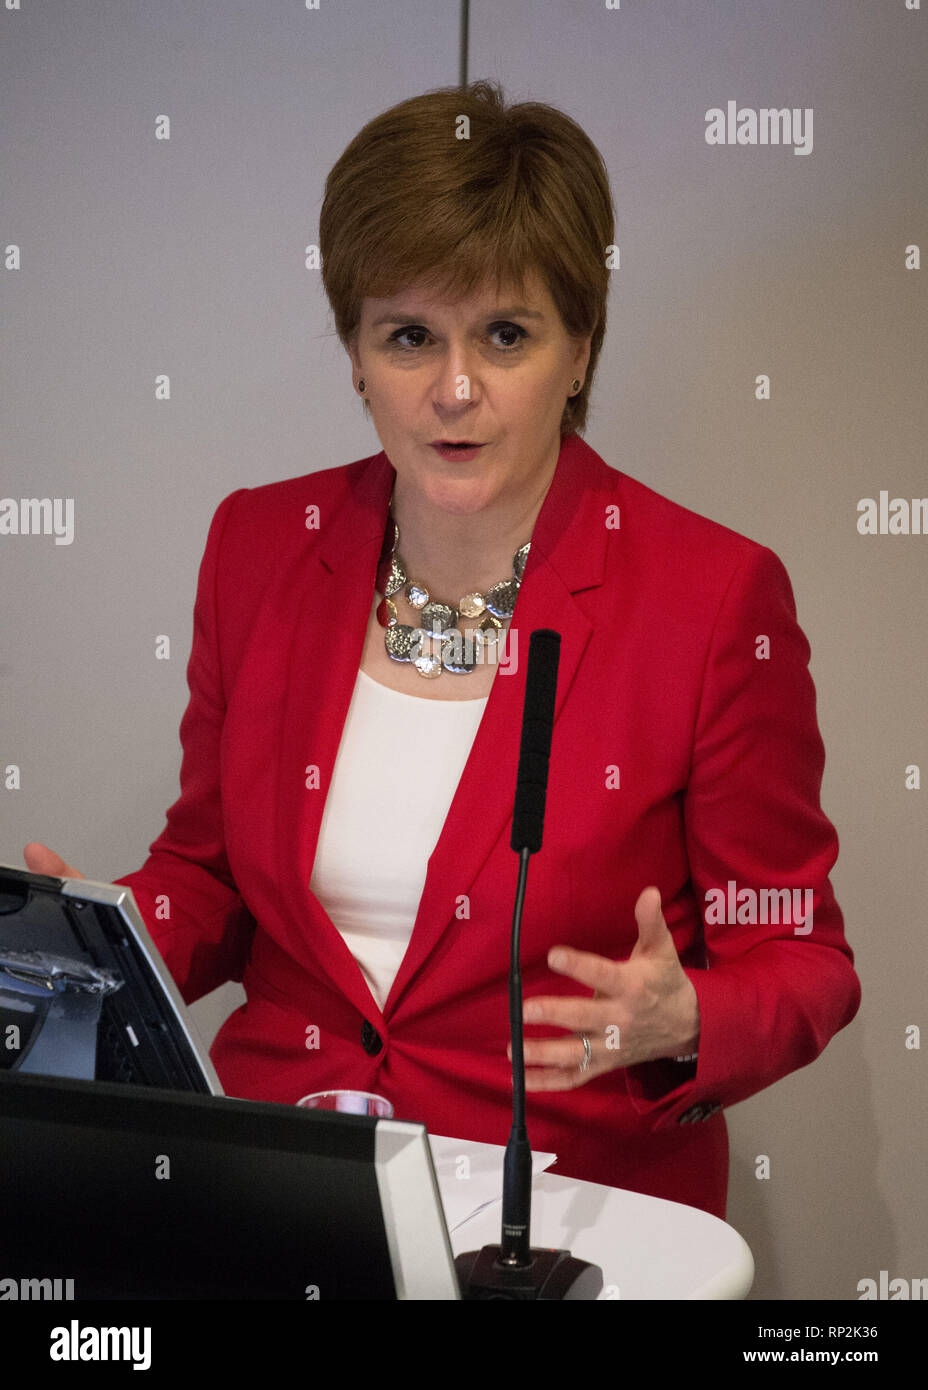 Glasgow, UK. 20 February 2019. First Minister, Nicola Sturgeon declares war on plastics delivering her opening speech at Scotland's International Marine Conference in Glasgow. Credit: Colin Fisher/Alamy Live News Stock Photo